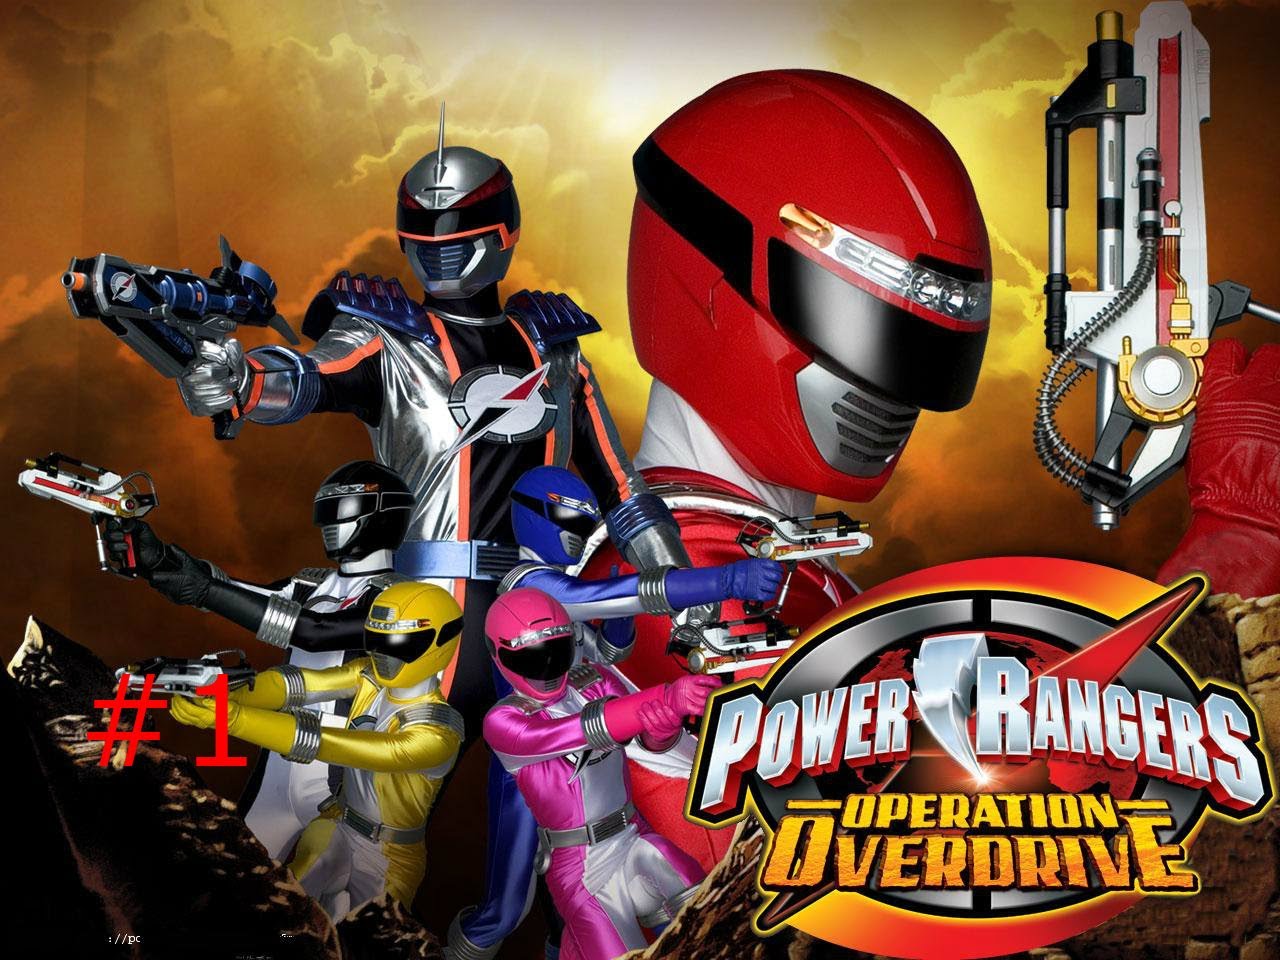 Power Rangers Super Legends Full Game download Latest version for free